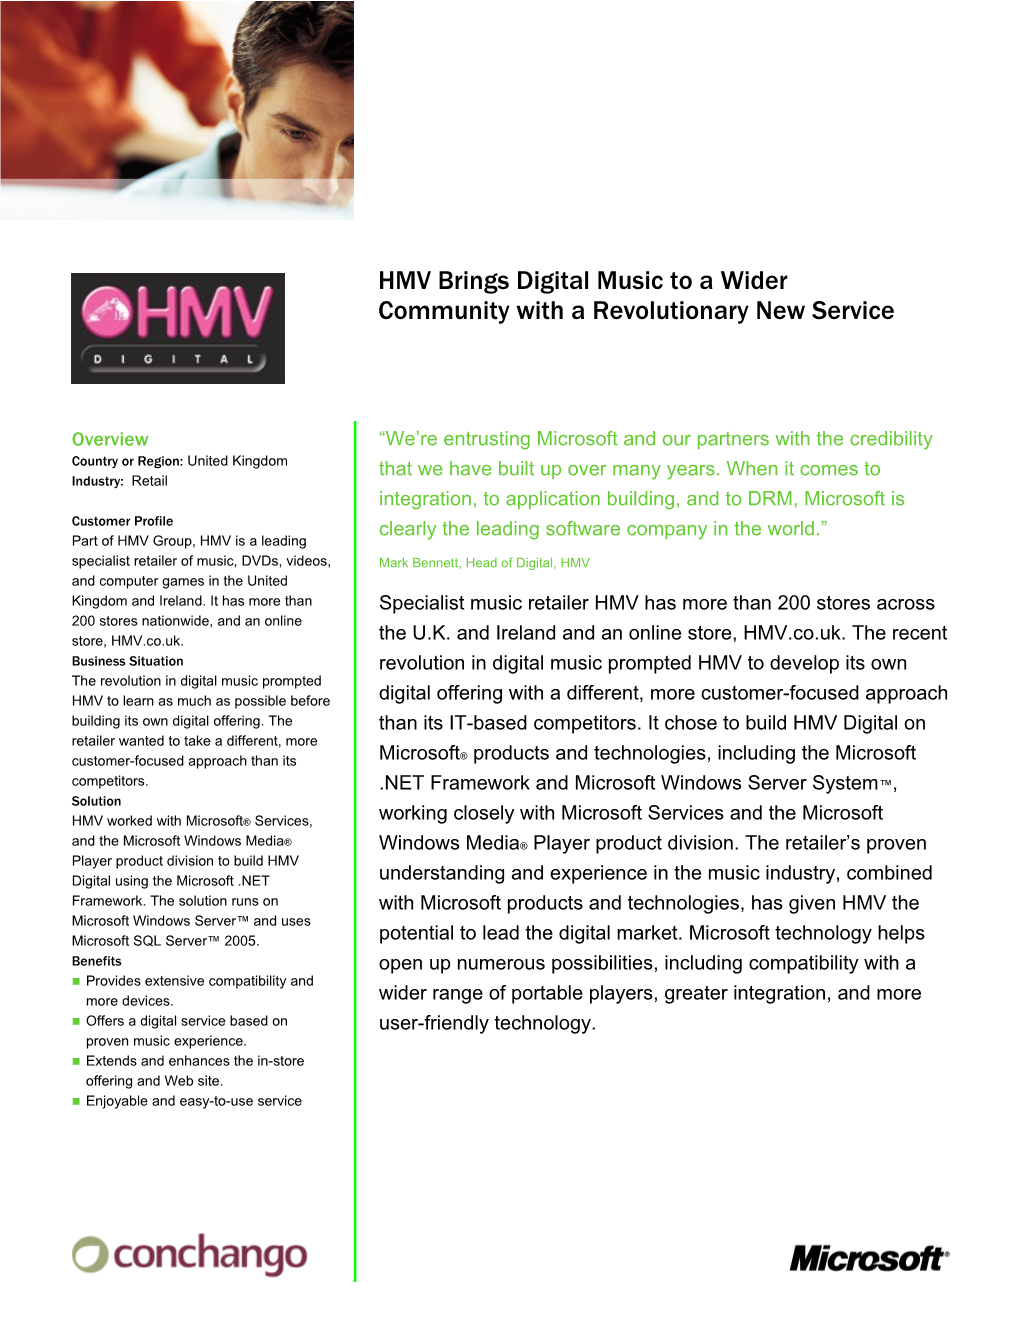 HMV Brings Digital Music to a Wider Community with a Revolutionary New Service